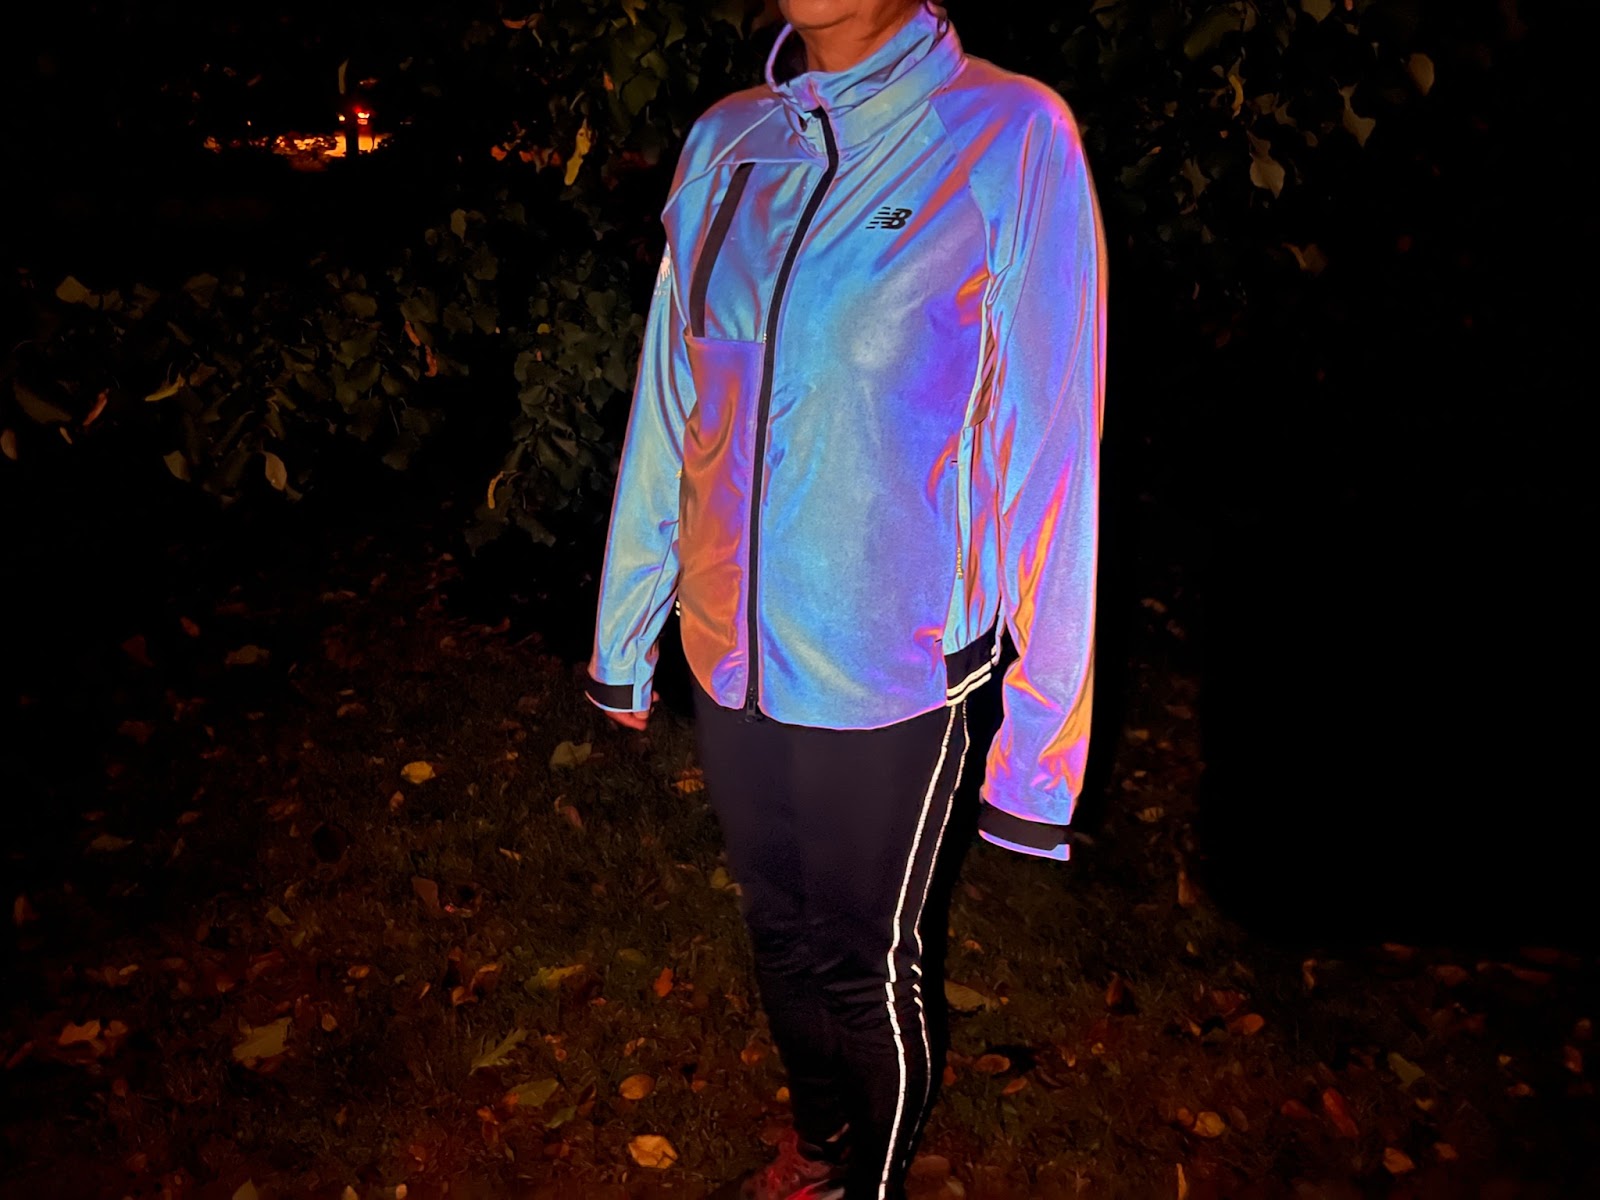 Road Trail Run: New Balance TCS New York City Marathon PMV Shutter Speed Jacket Review: Light Shows and Protection!